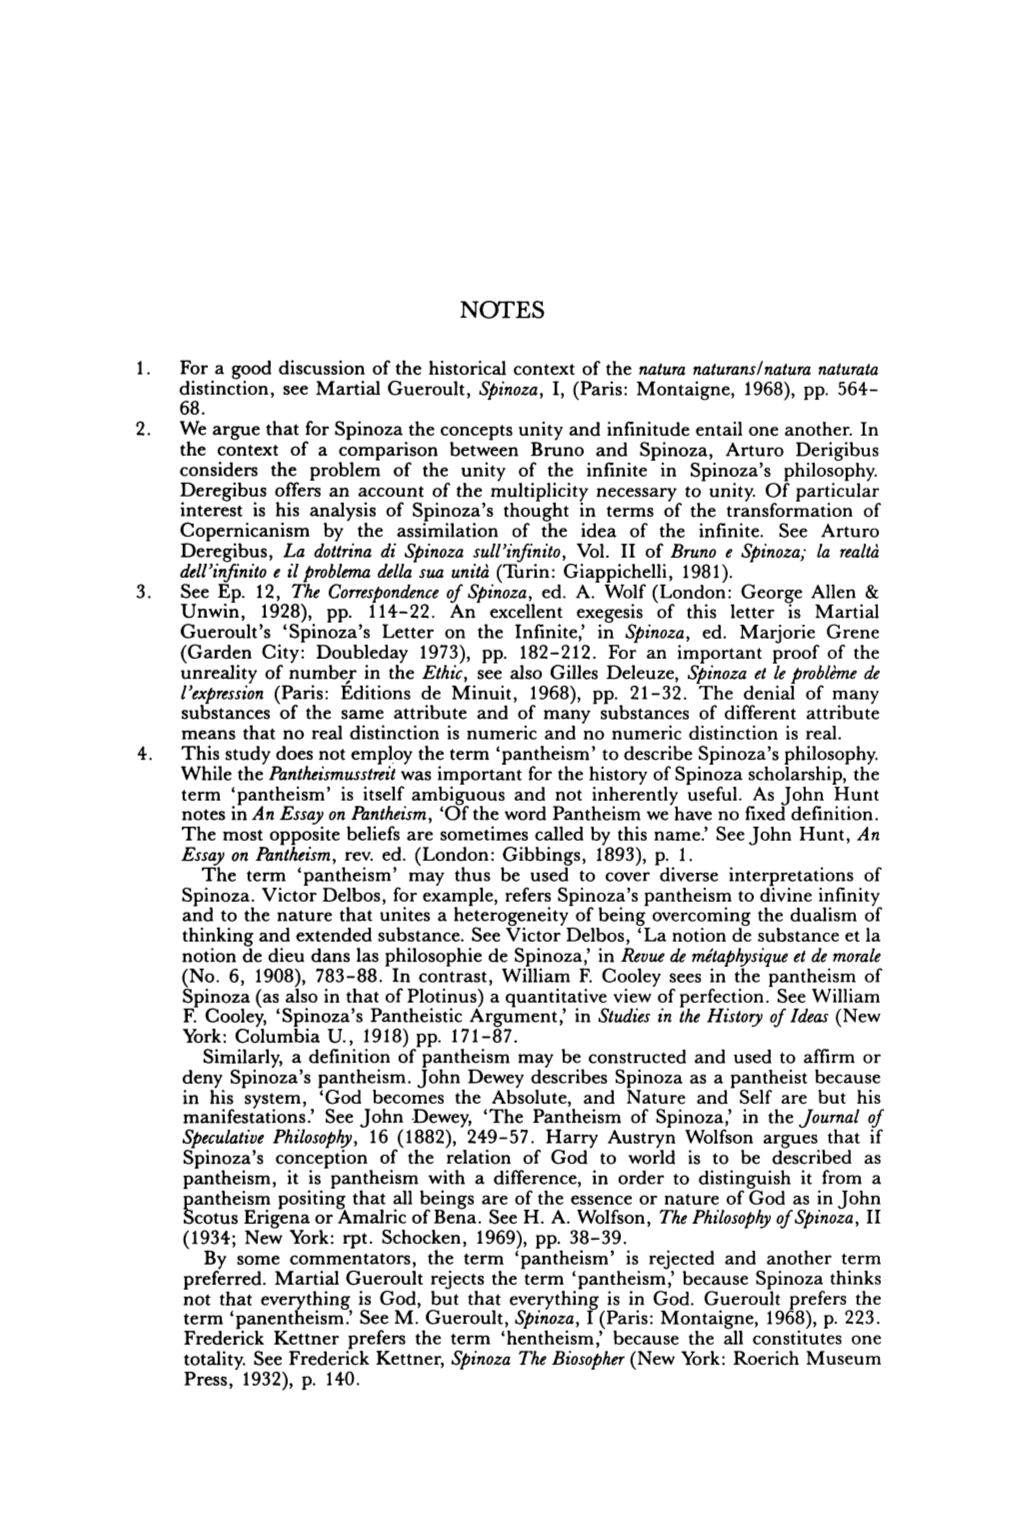 1. for a Good Discussion of the Historical Context of the Natura Naturans/Natura Naturata Distinction, See Martial Gueroult, Spinoza, I, (Paris: Montaigne, 1968), Pp